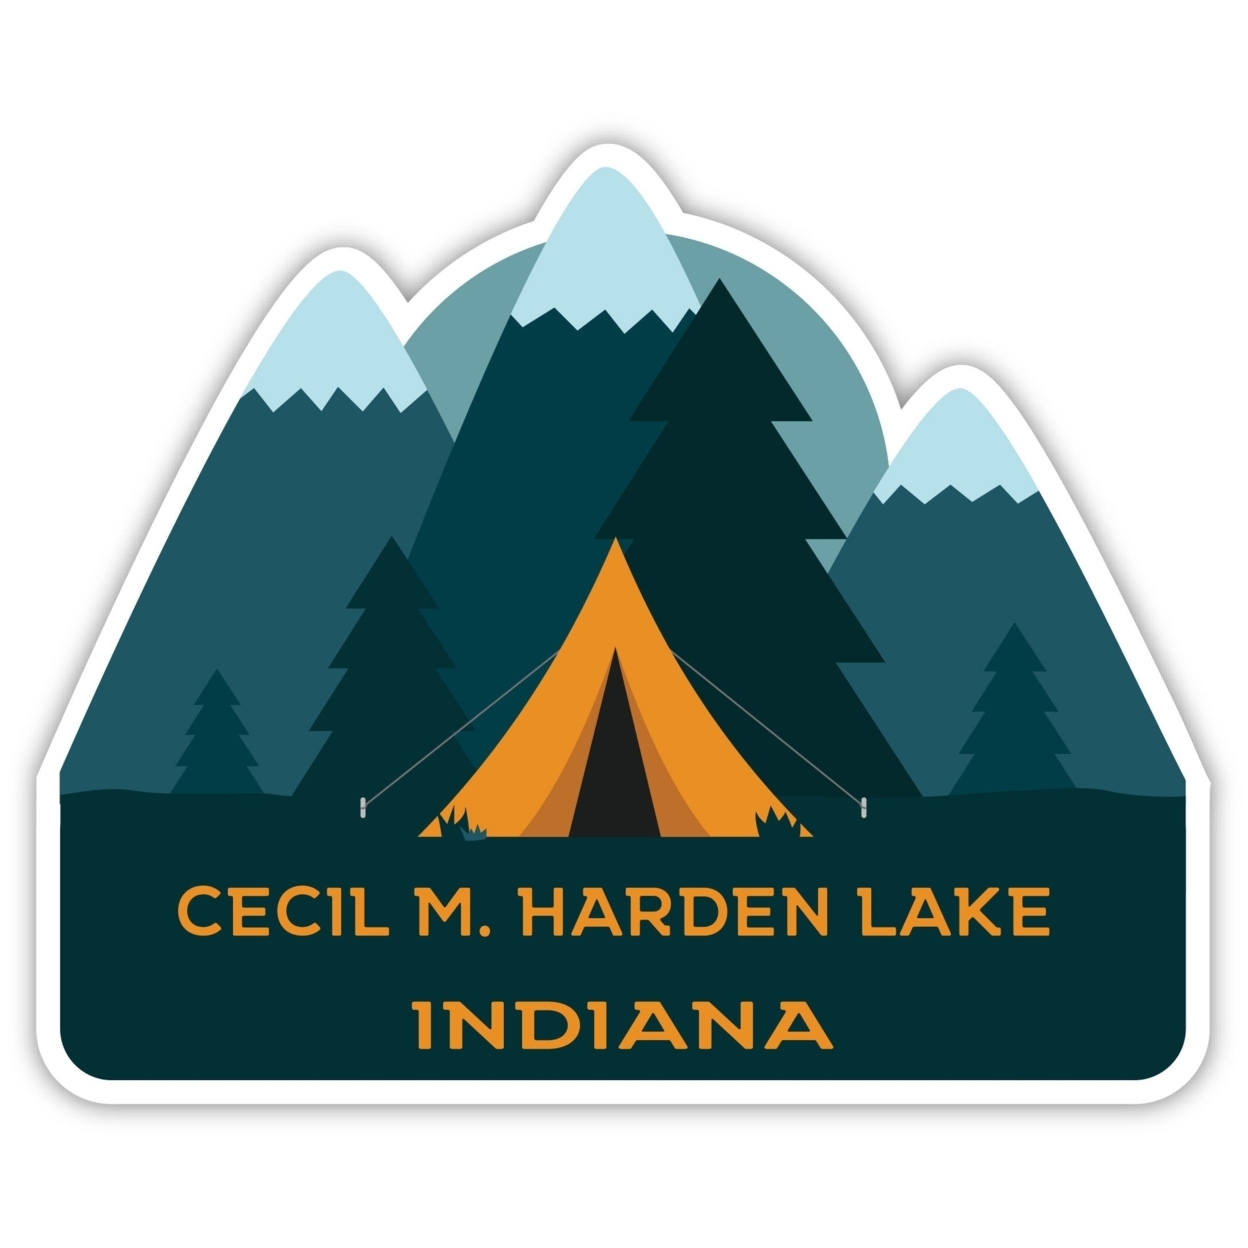 Cecil M. Harden Lake Indiana Souvenir Decorative Stickers (Choose Theme And Size) - 4-Pack, 10-Inch, Tent